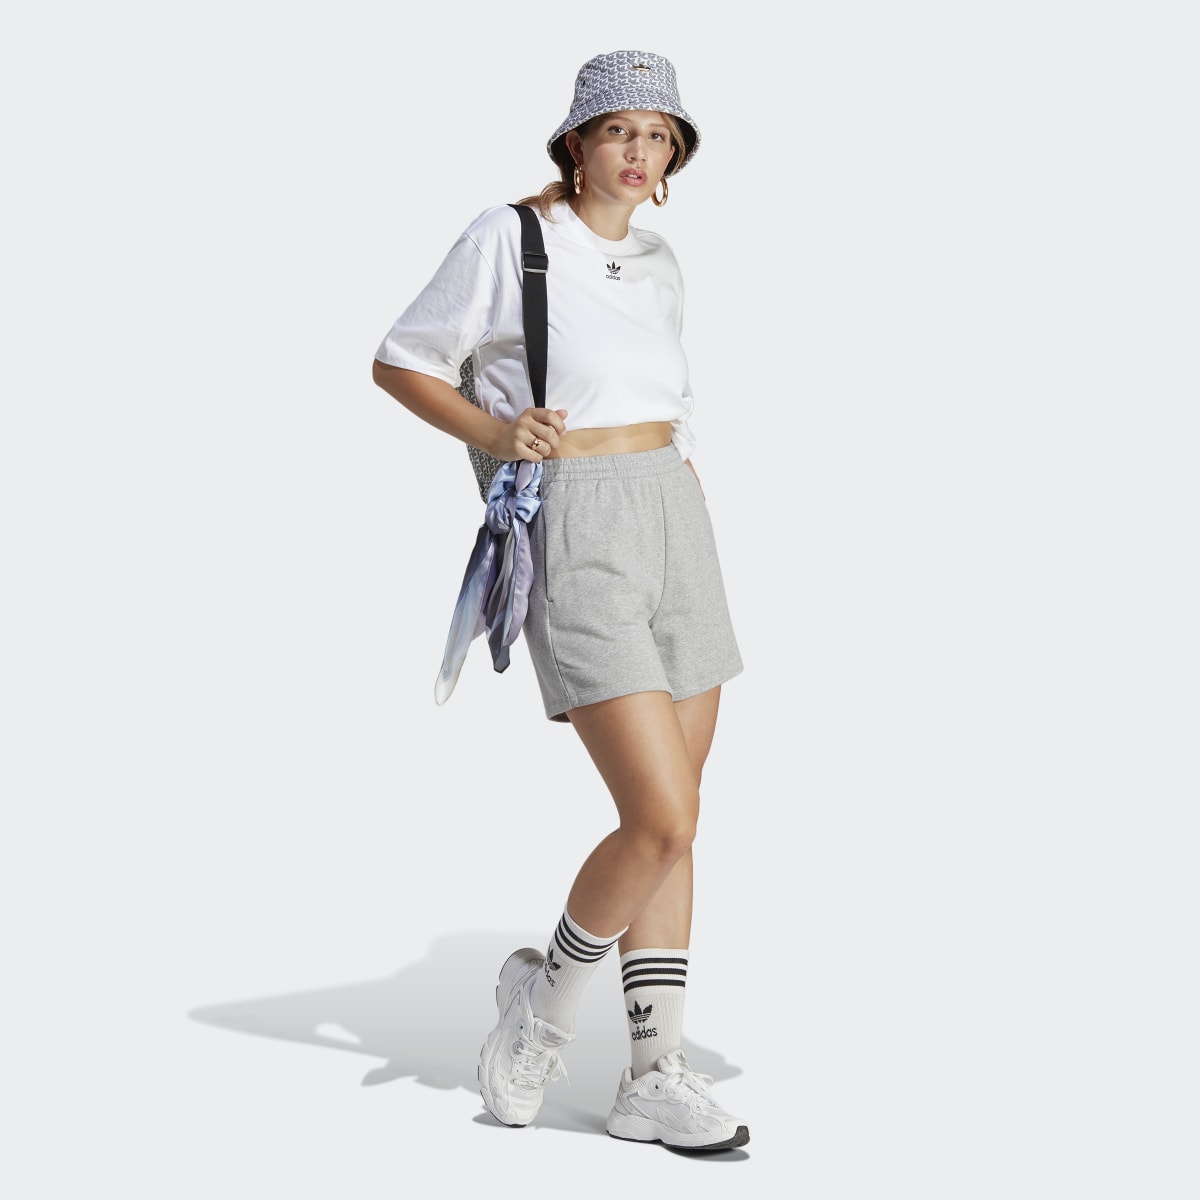 Adidas Adicolor Essentials French Terry Shorts. 4